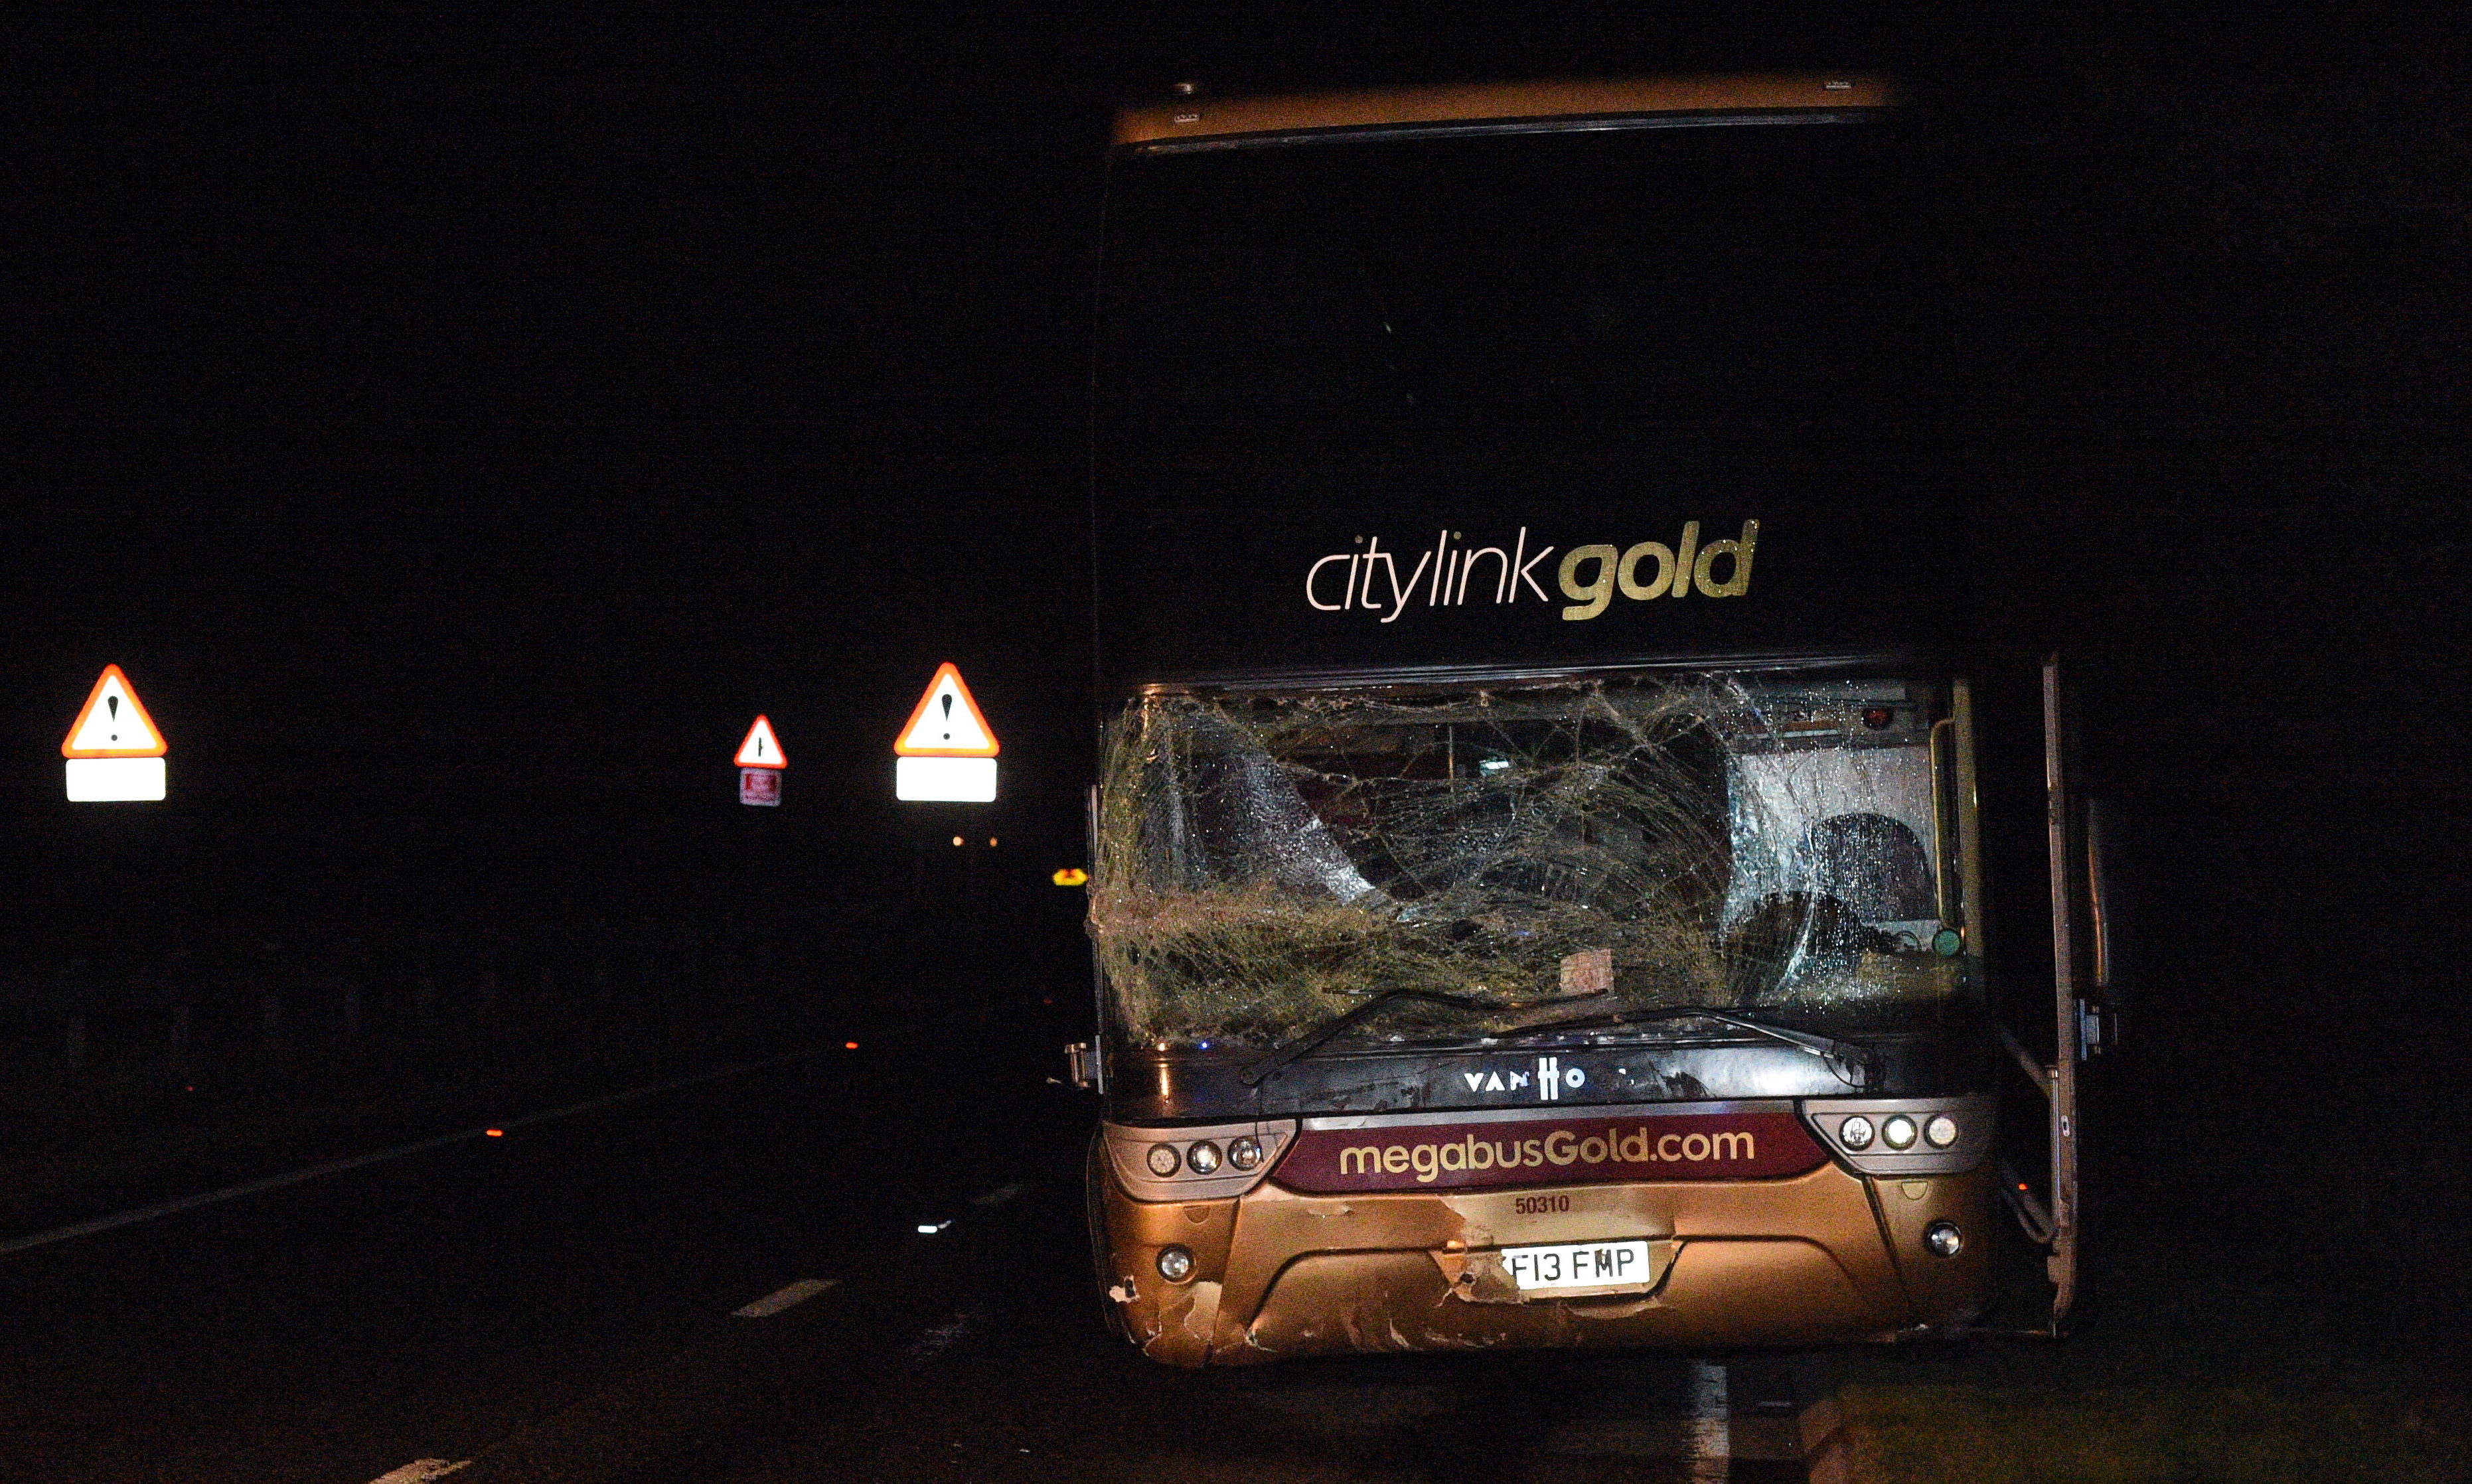 The Citylink Gold bus which was involved in the A90 crash.